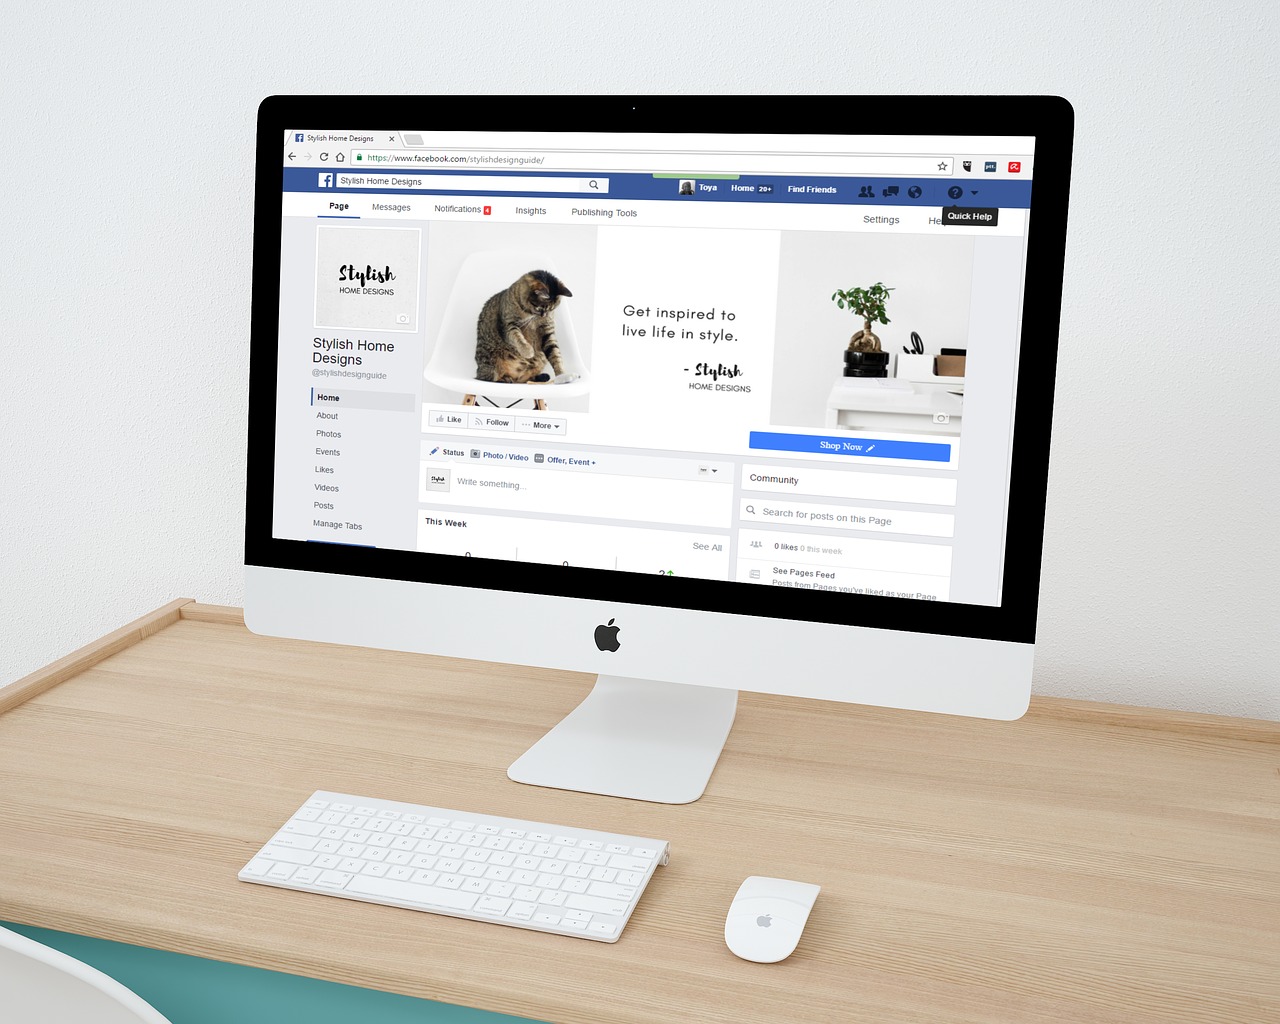 How to Promote Your Business in Facebook Groups